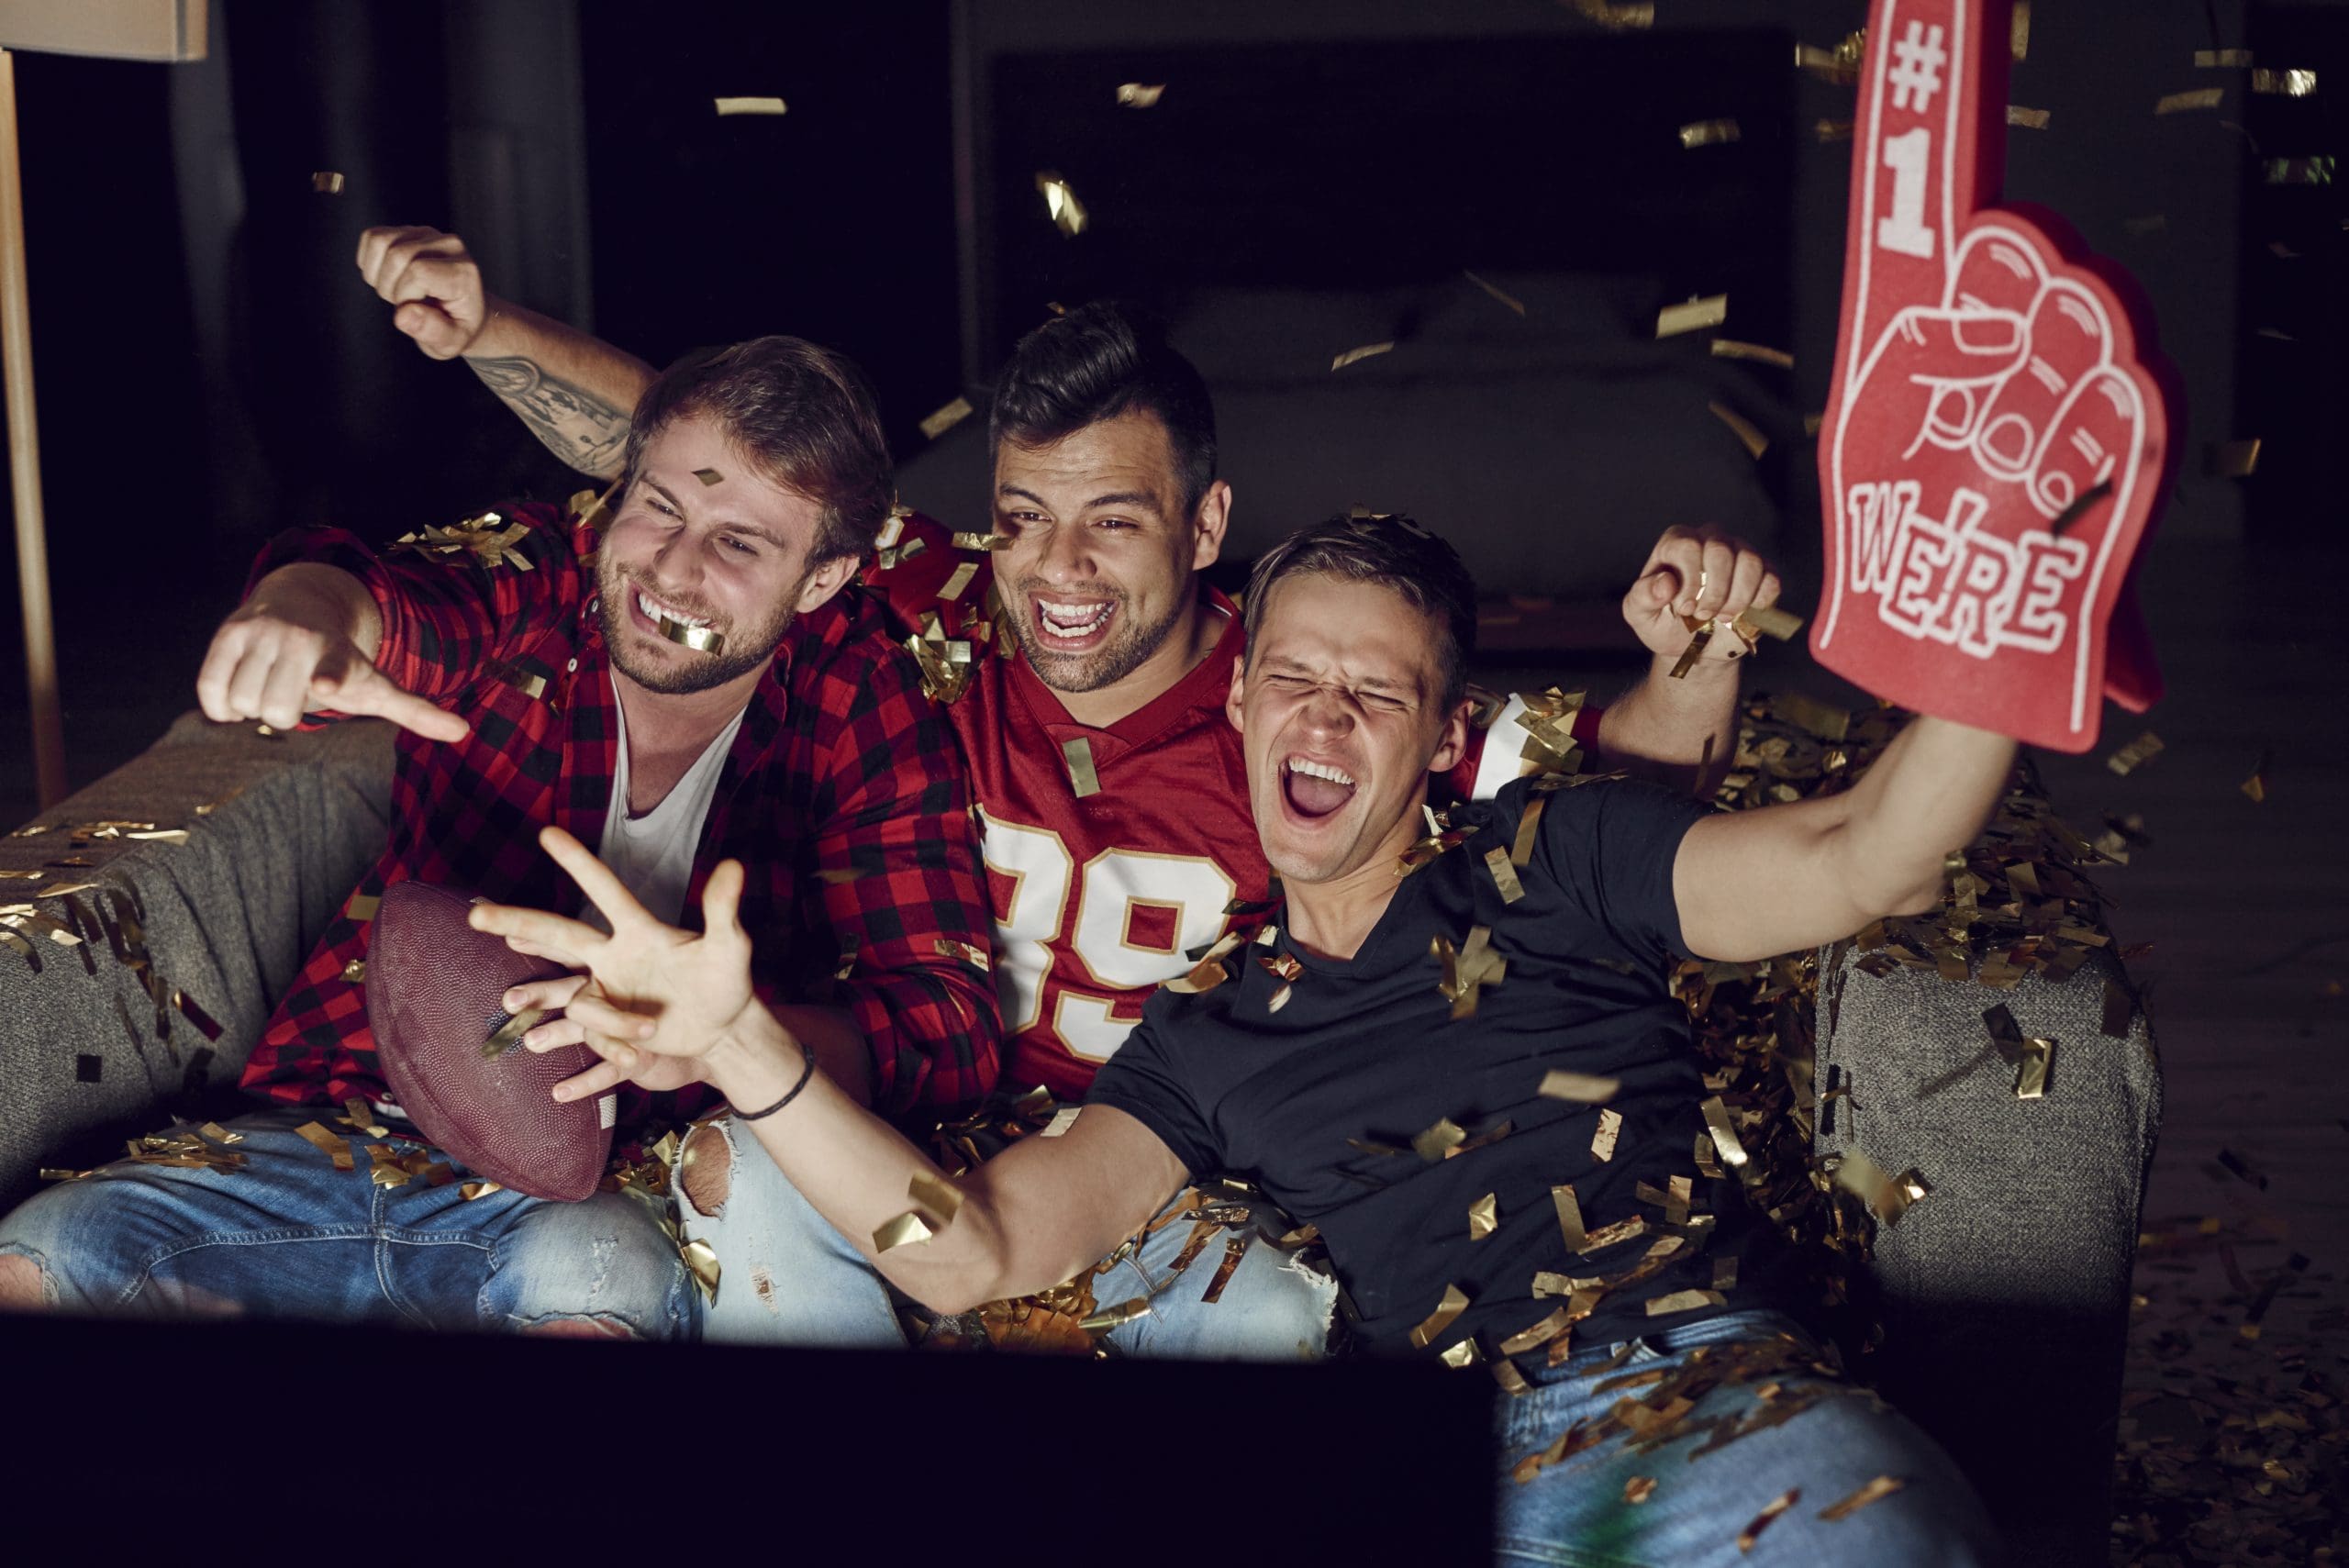 sport fans cheering on favorite team at ultimate super bowl party at home